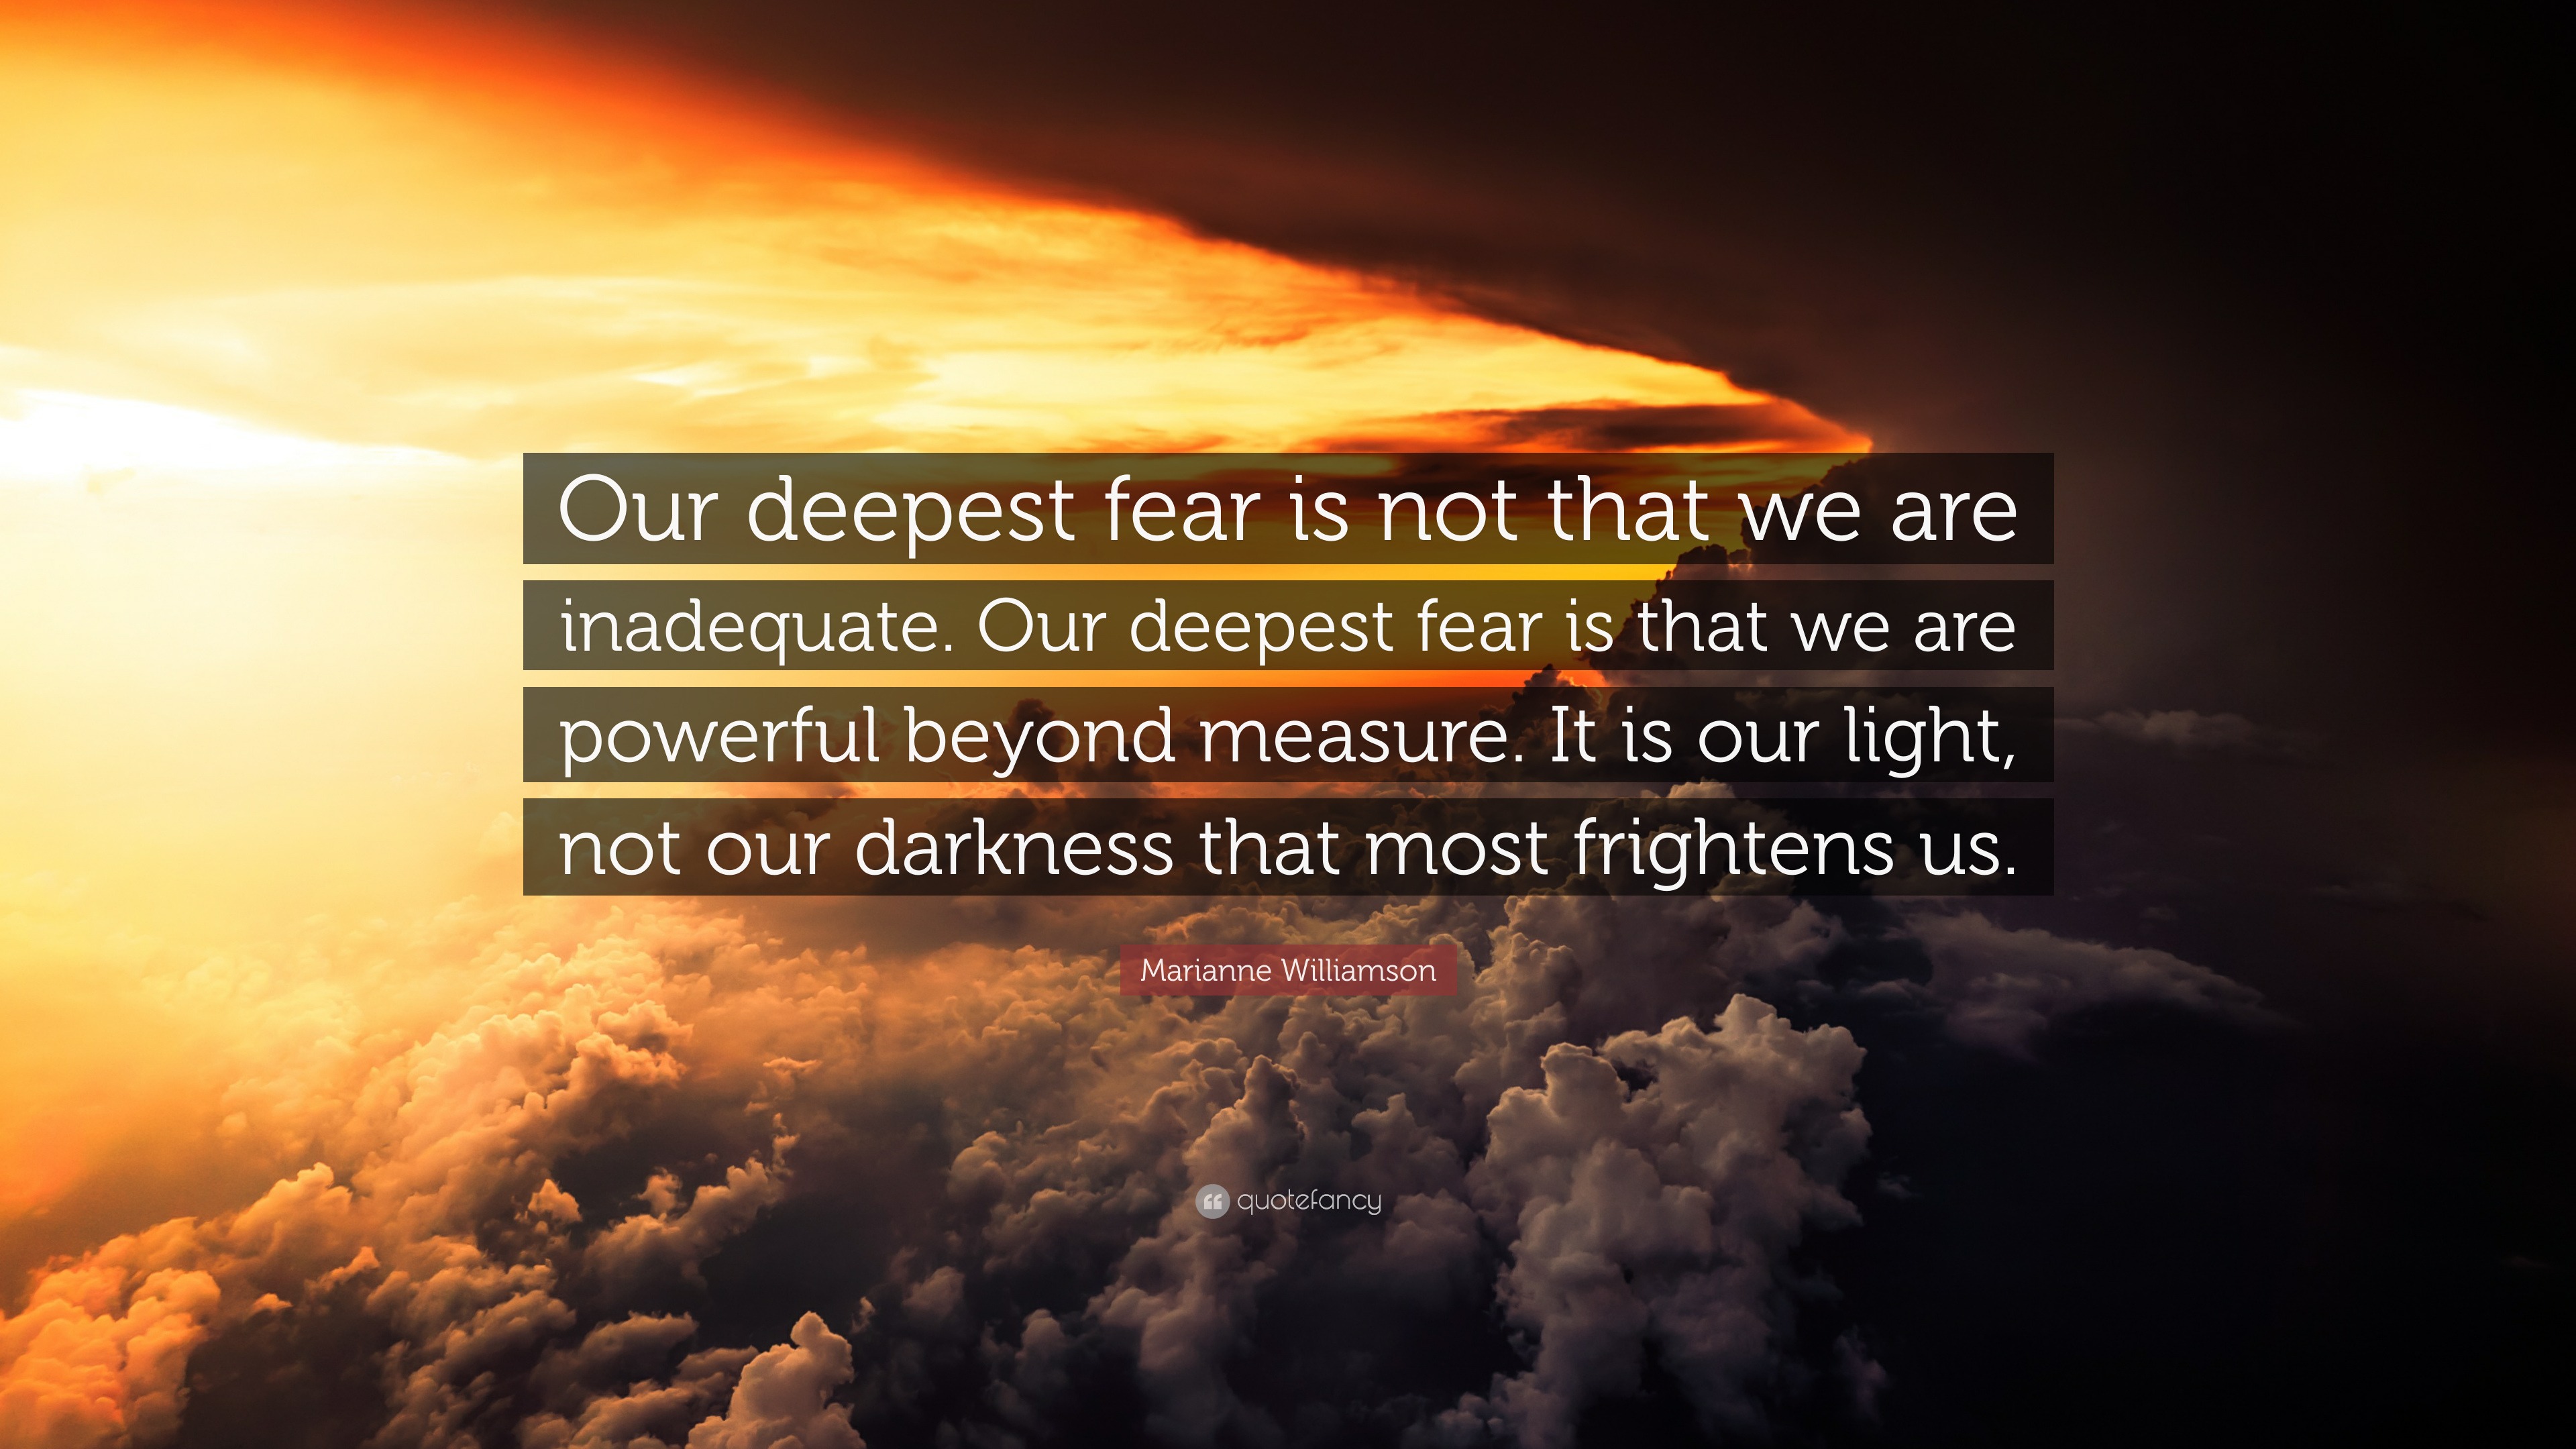 beautiful-darkness-quotes-marianne-williamson-quote-our-deepest